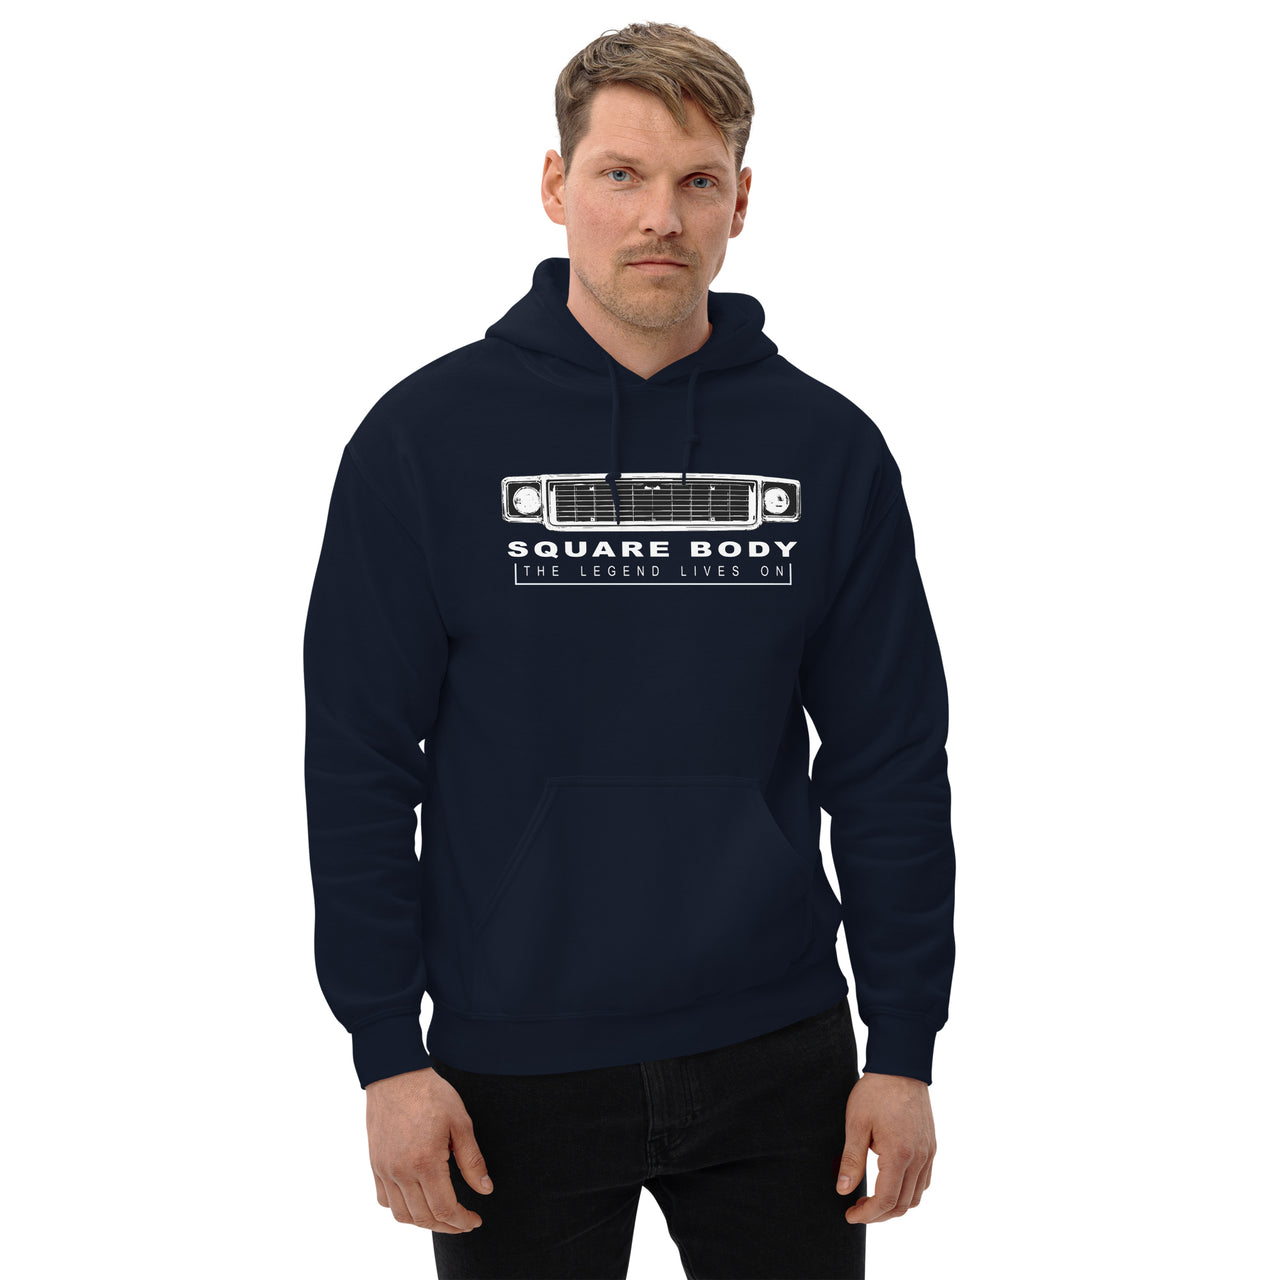 70s Square Body The Legend Lives On Hoodie modeled in navy